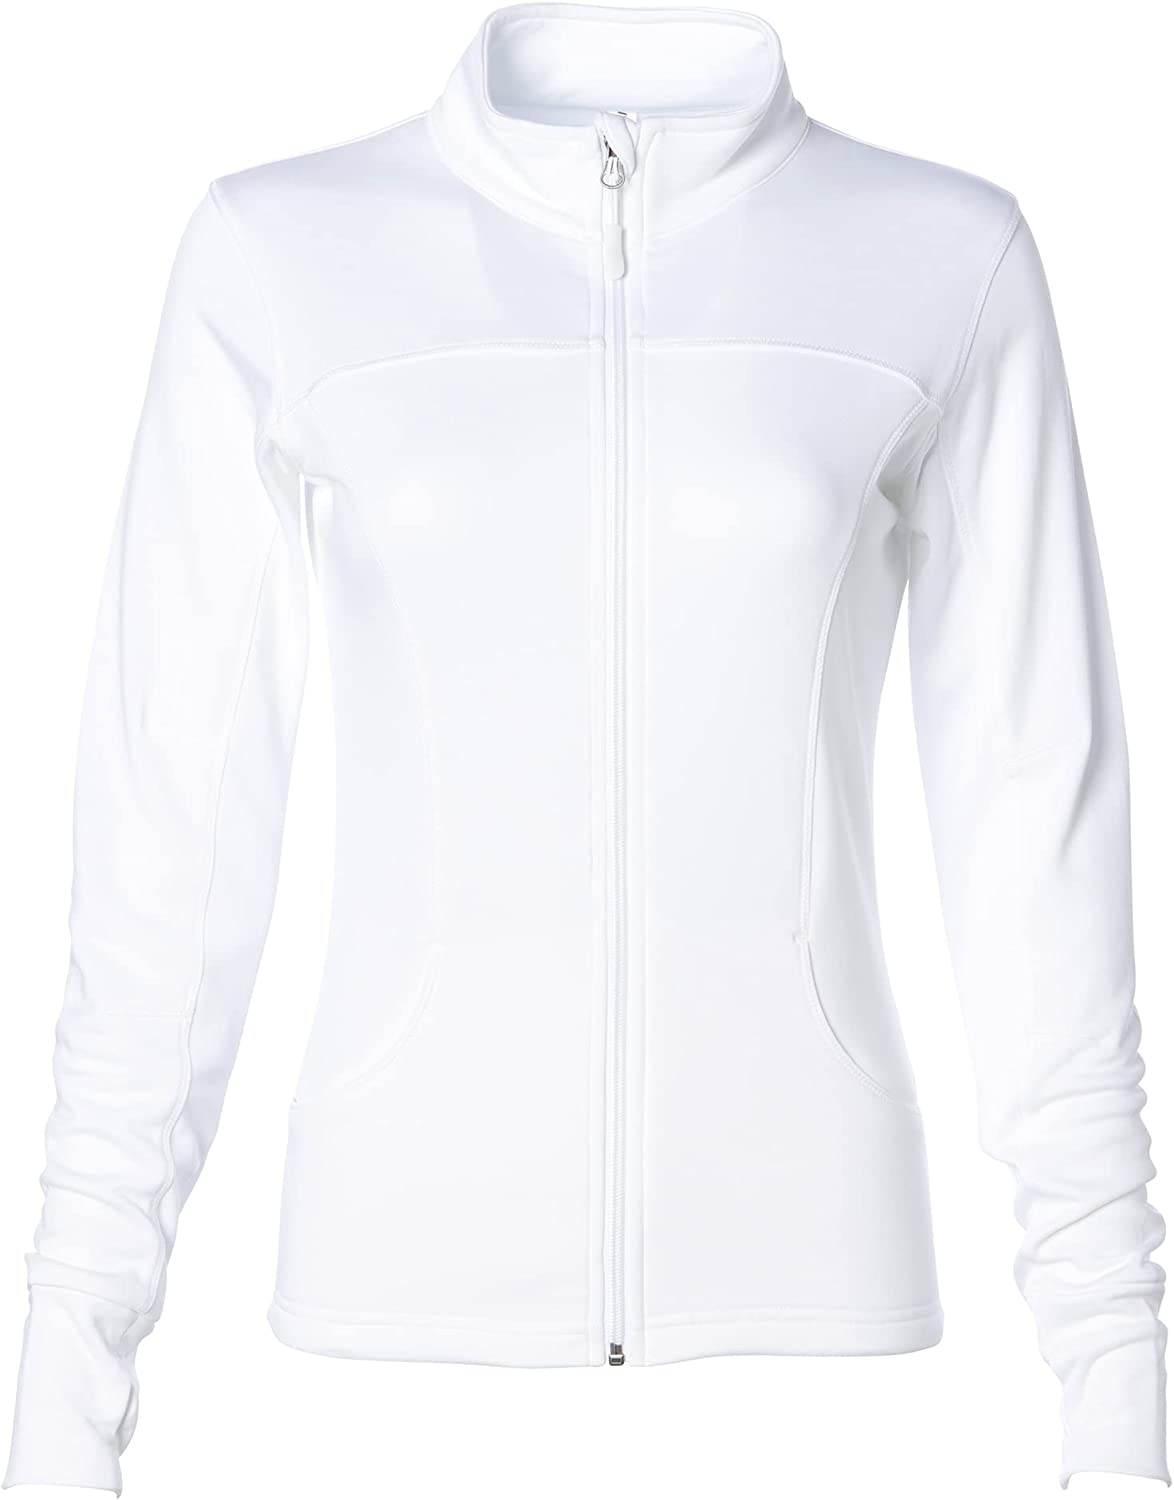 Global Blank Athletic Workout Jackets for Women, Full Zip-Up Jacket for  Running, | eBay